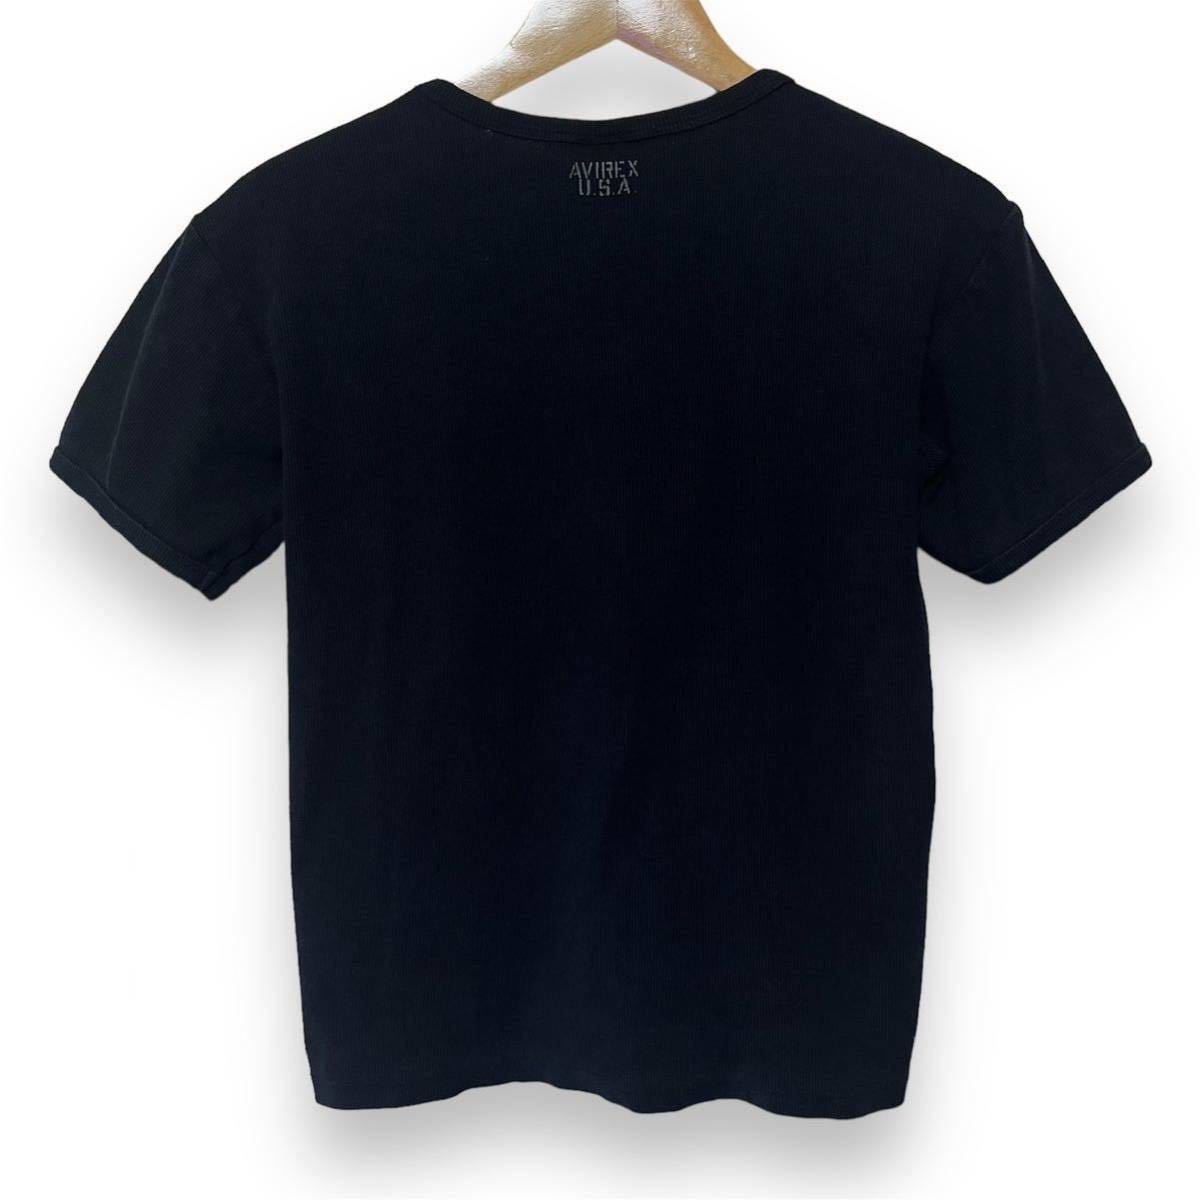 AVIREX Avirex tei Lee DAILY short sleeves T-shirt black undecorated fabric black tops lady's attire goods secondhand goods [4890]F